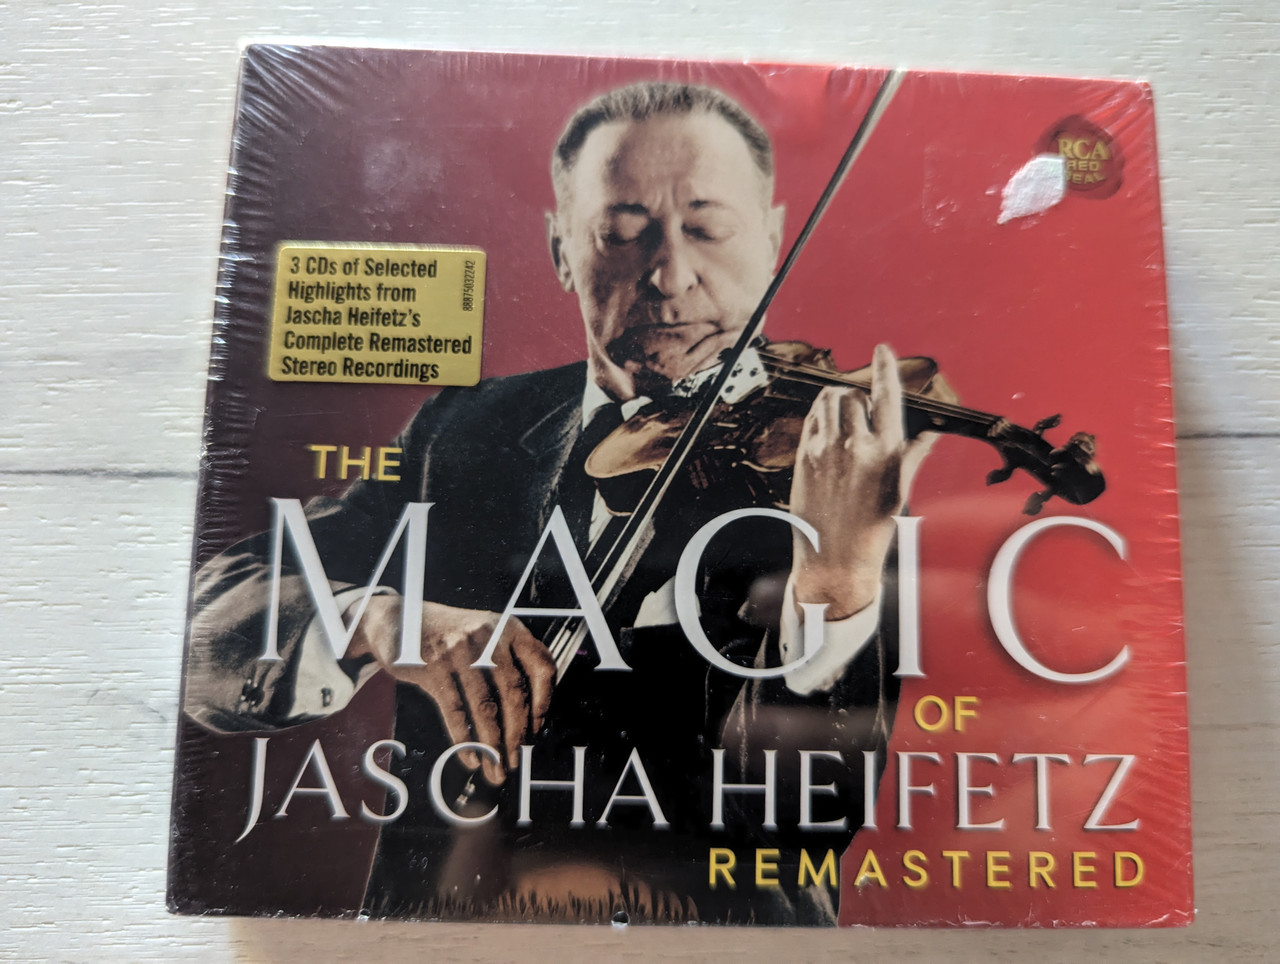 https://cdn10.bigcommerce.com/s-62bdpkt7pb/products/0/images/314144/The_Magic_of_Jascha_Heifetz_-_Remastered_3_CDs_of_Selected_Highlights_from_Jascha_Heifetzs_Complete_Remastered_Stereo_Recordings_RCA_Red_Seal_3x_Audio_CD_2016_88875032242_1__06522.1701324208.1280.1280.jpg?c=2